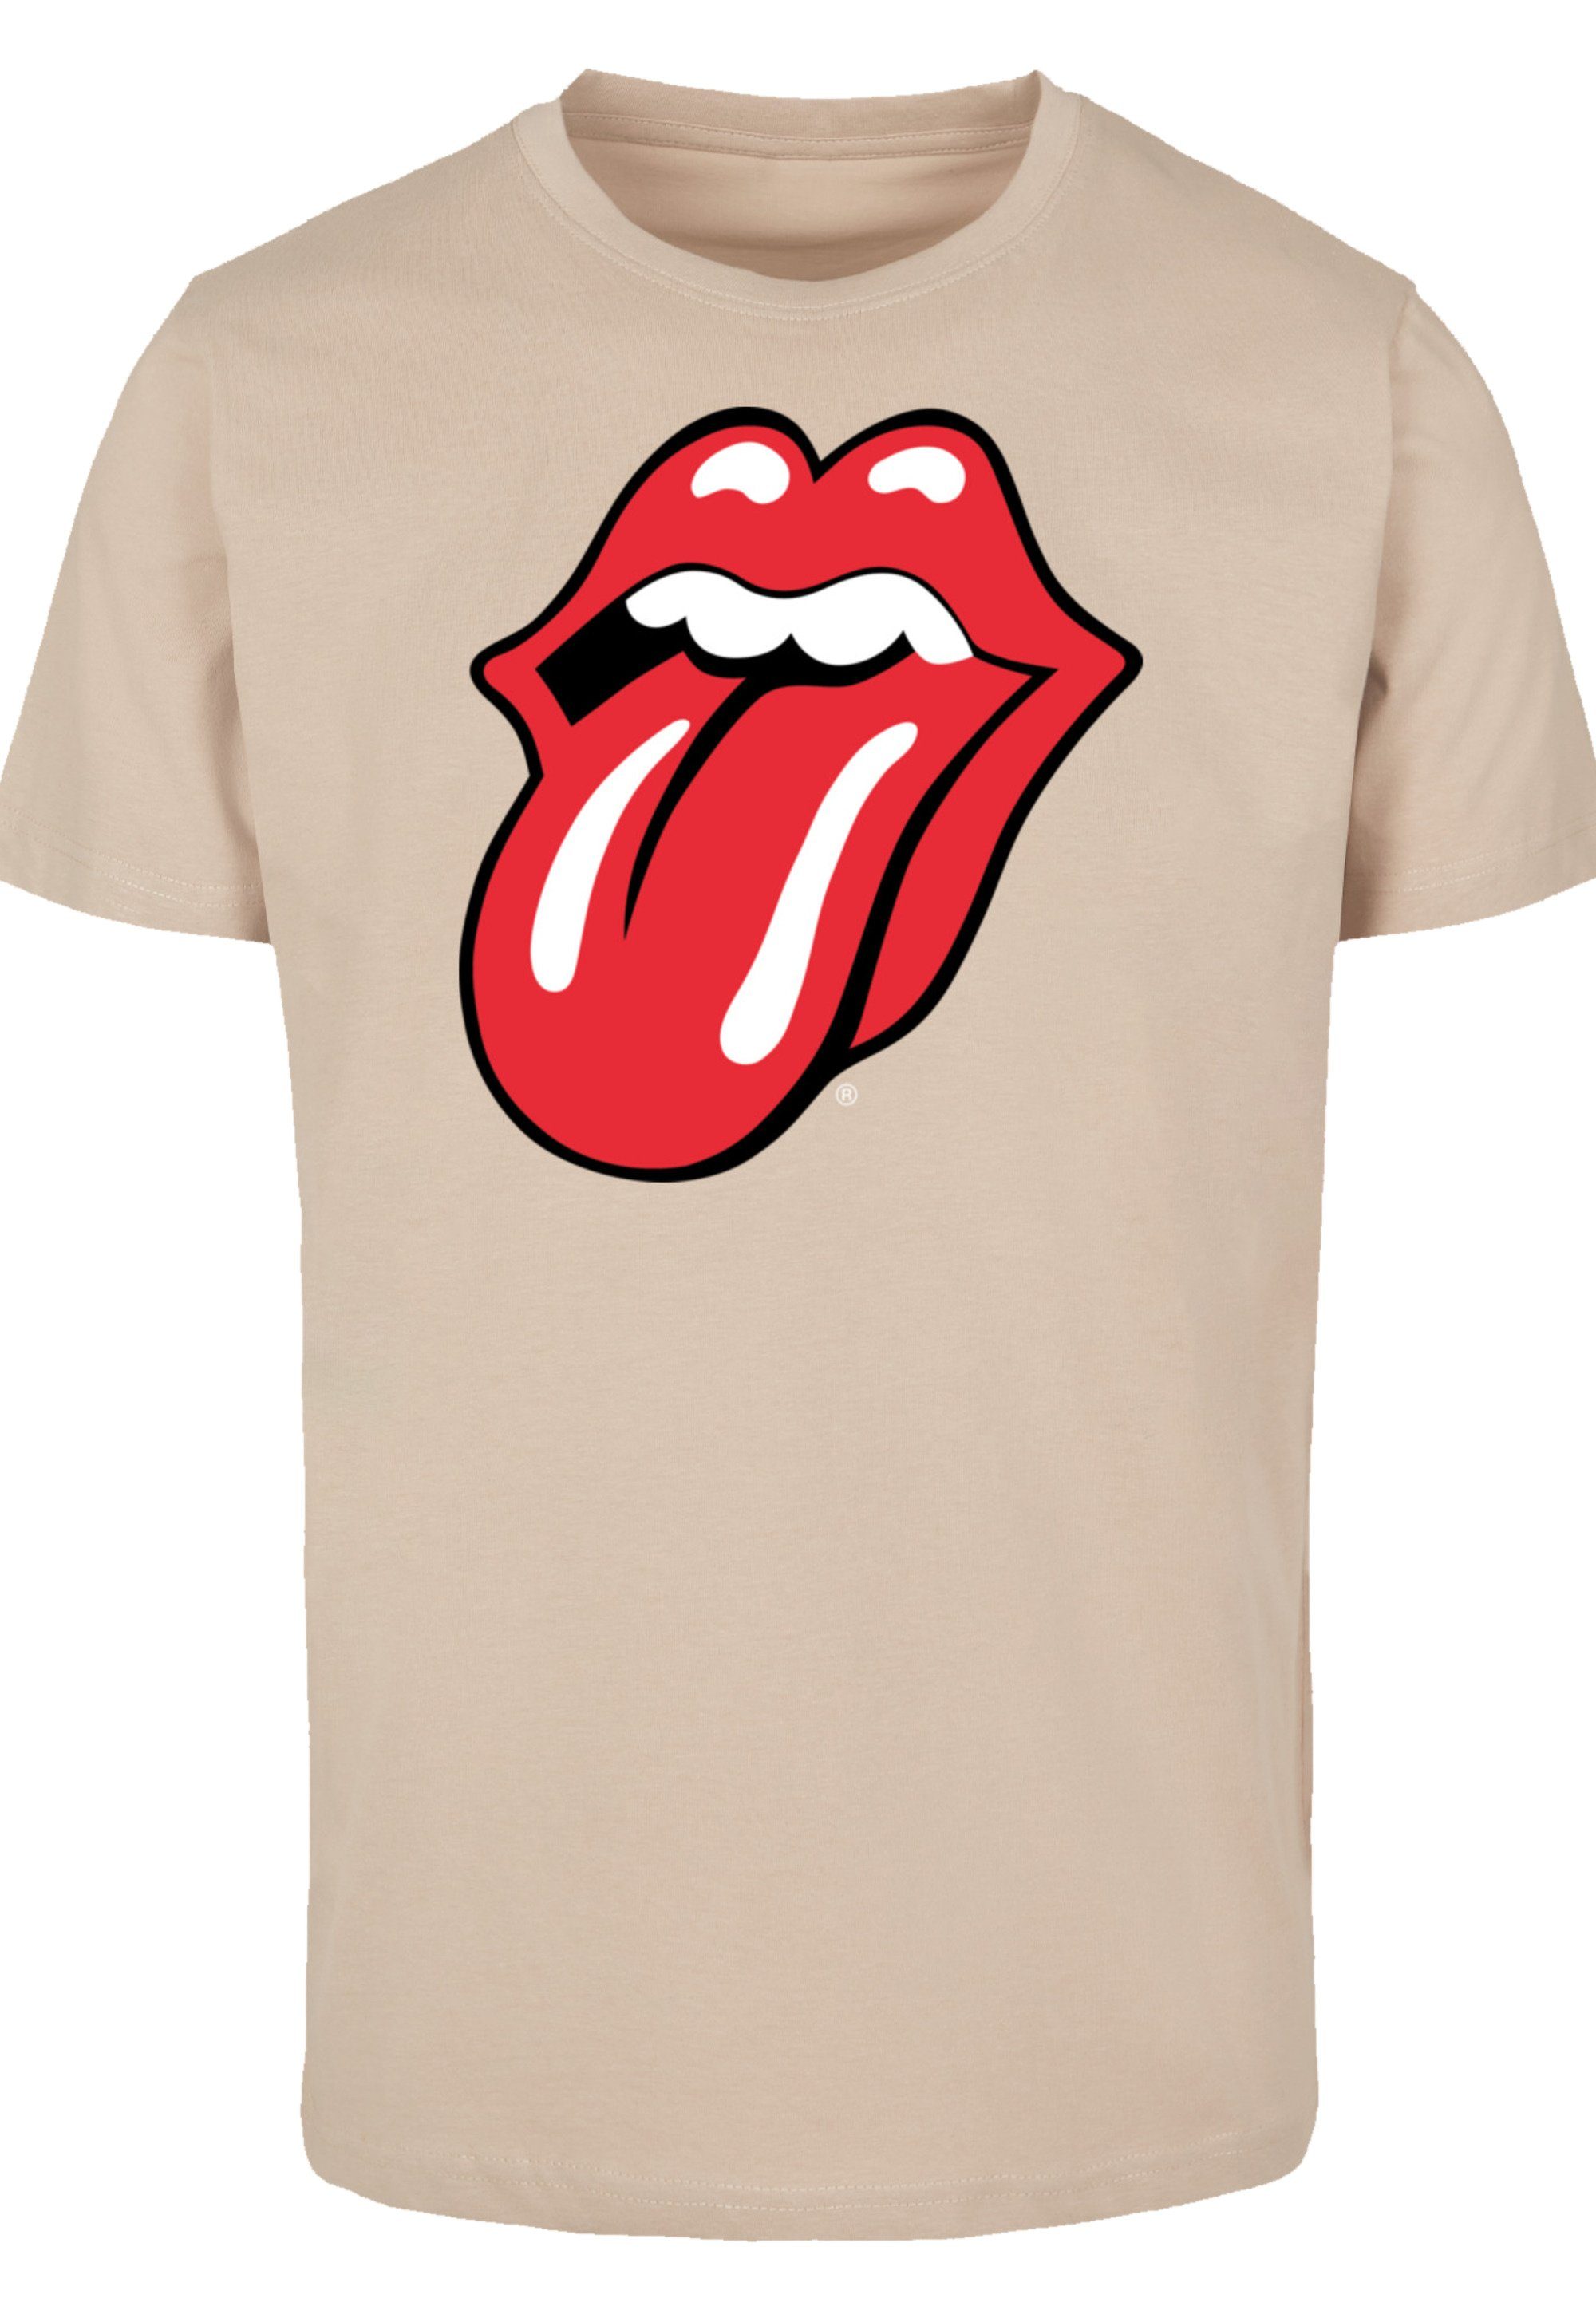 F4NT4STIC T-Shirt Stones sand Print Rote Rolling The Zunge